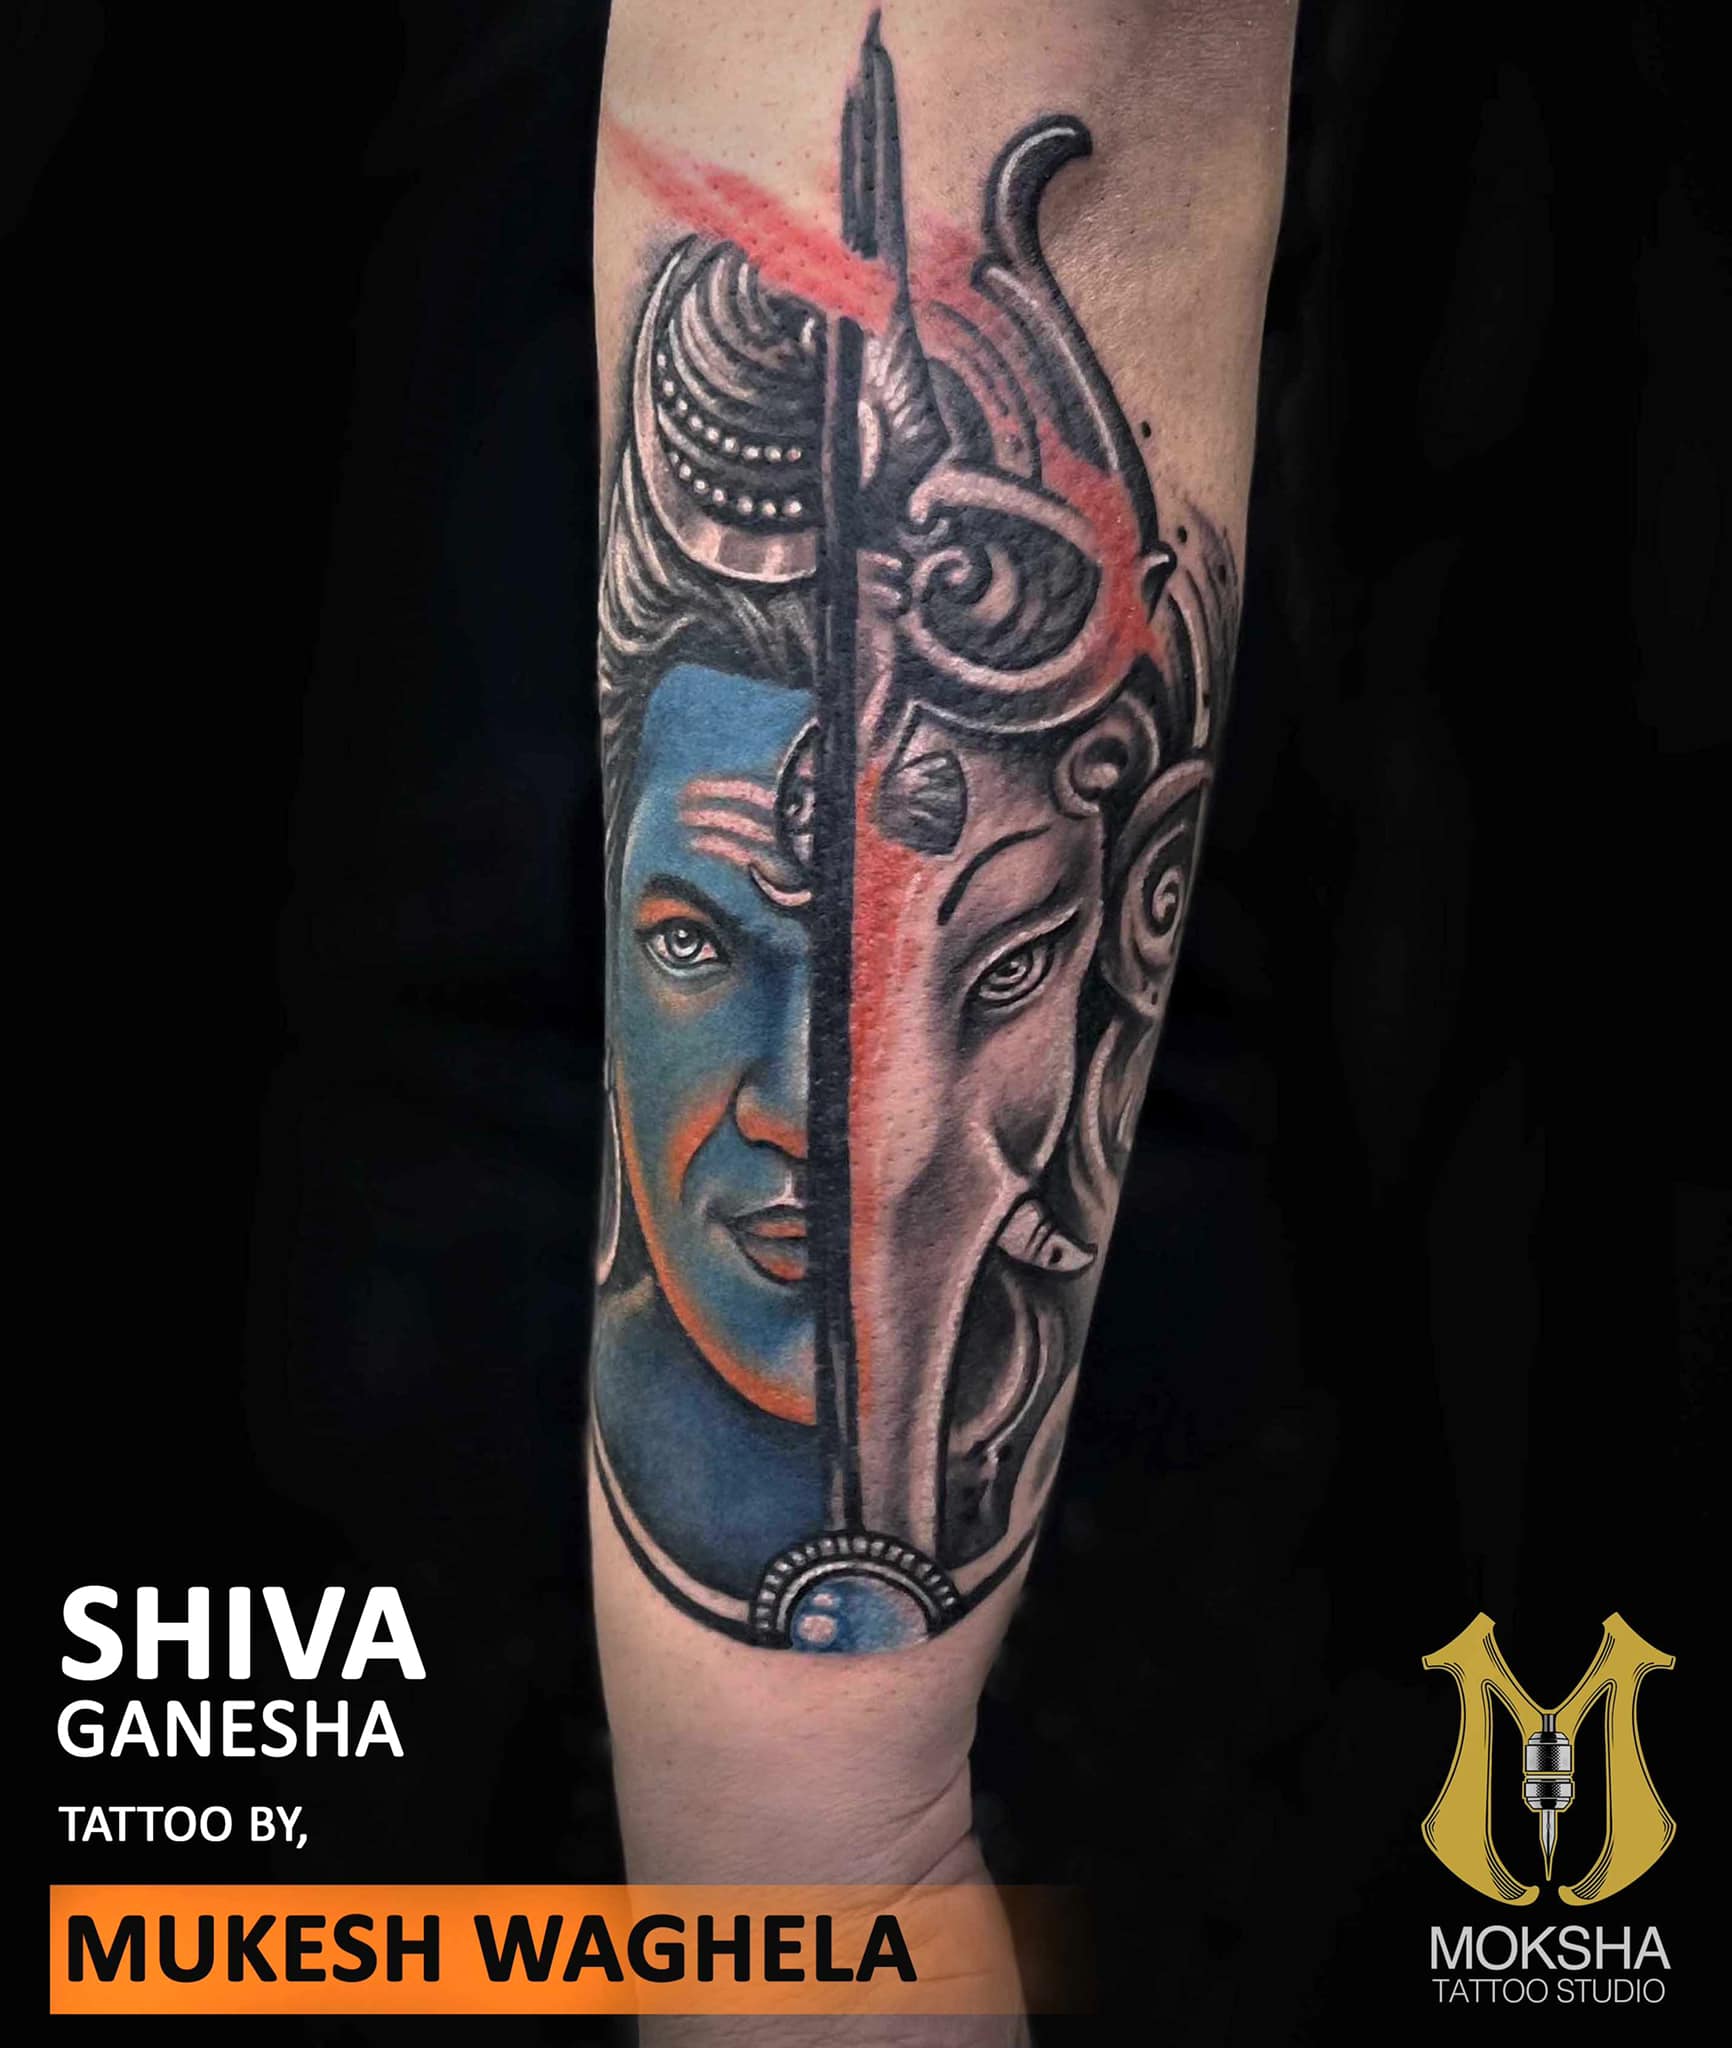 Heres why Ankit Mohan sports a Lord Shiva tattoo  Marathi Movie News   Times of India